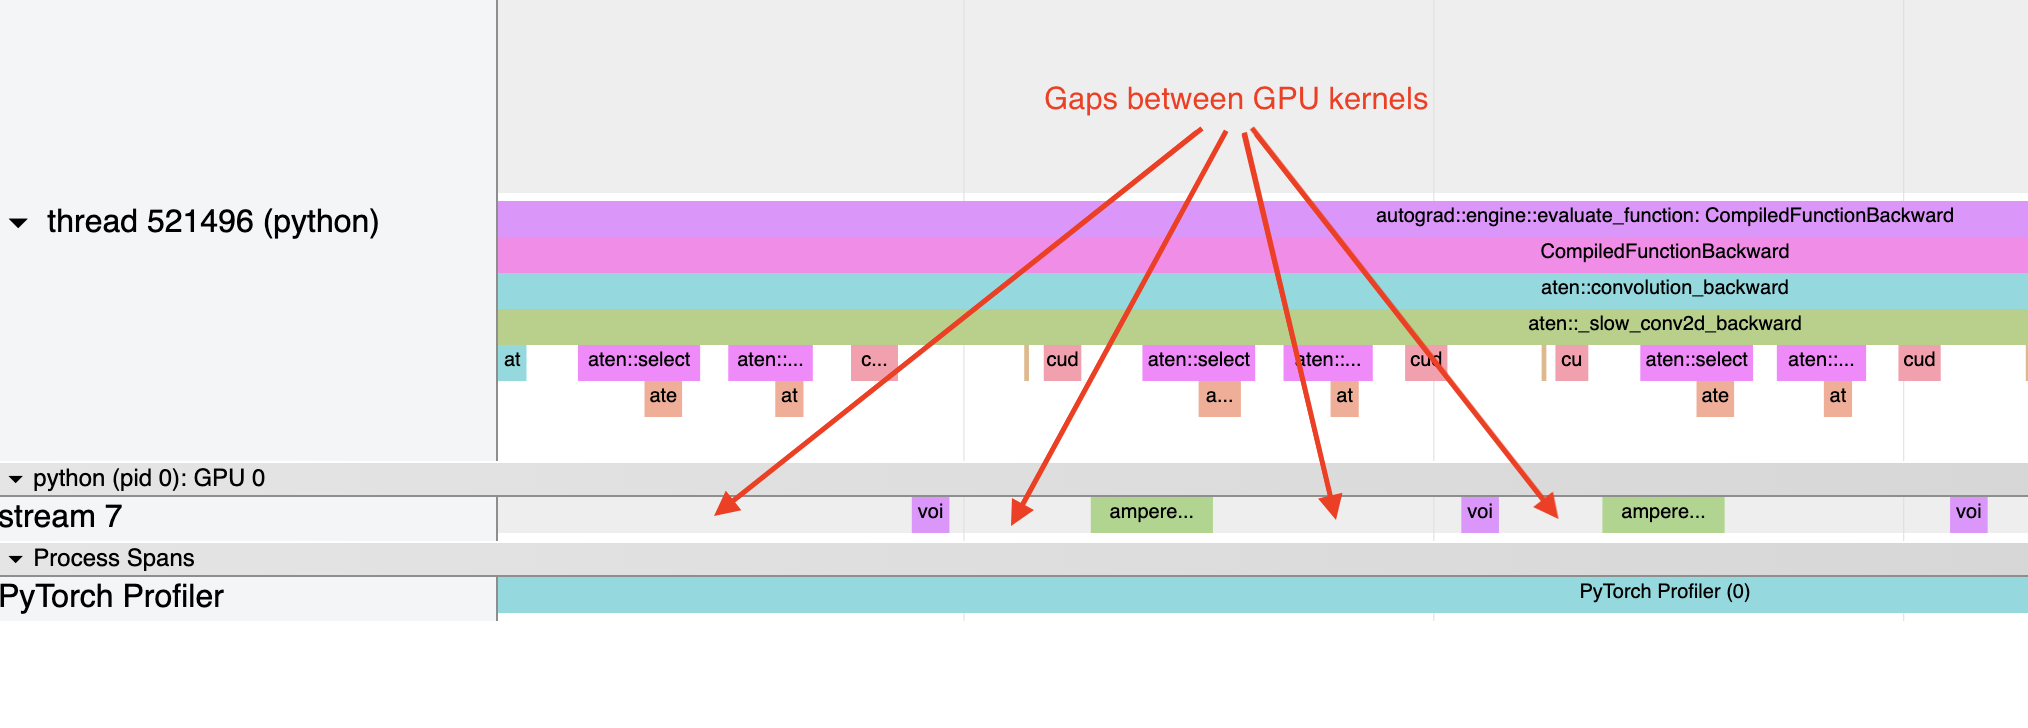 Visualization in the chrome://trace viewer, showing large gaps between GPU kernels. This indicates that the model is CPU bound, likely due to overhead during kernel launches.